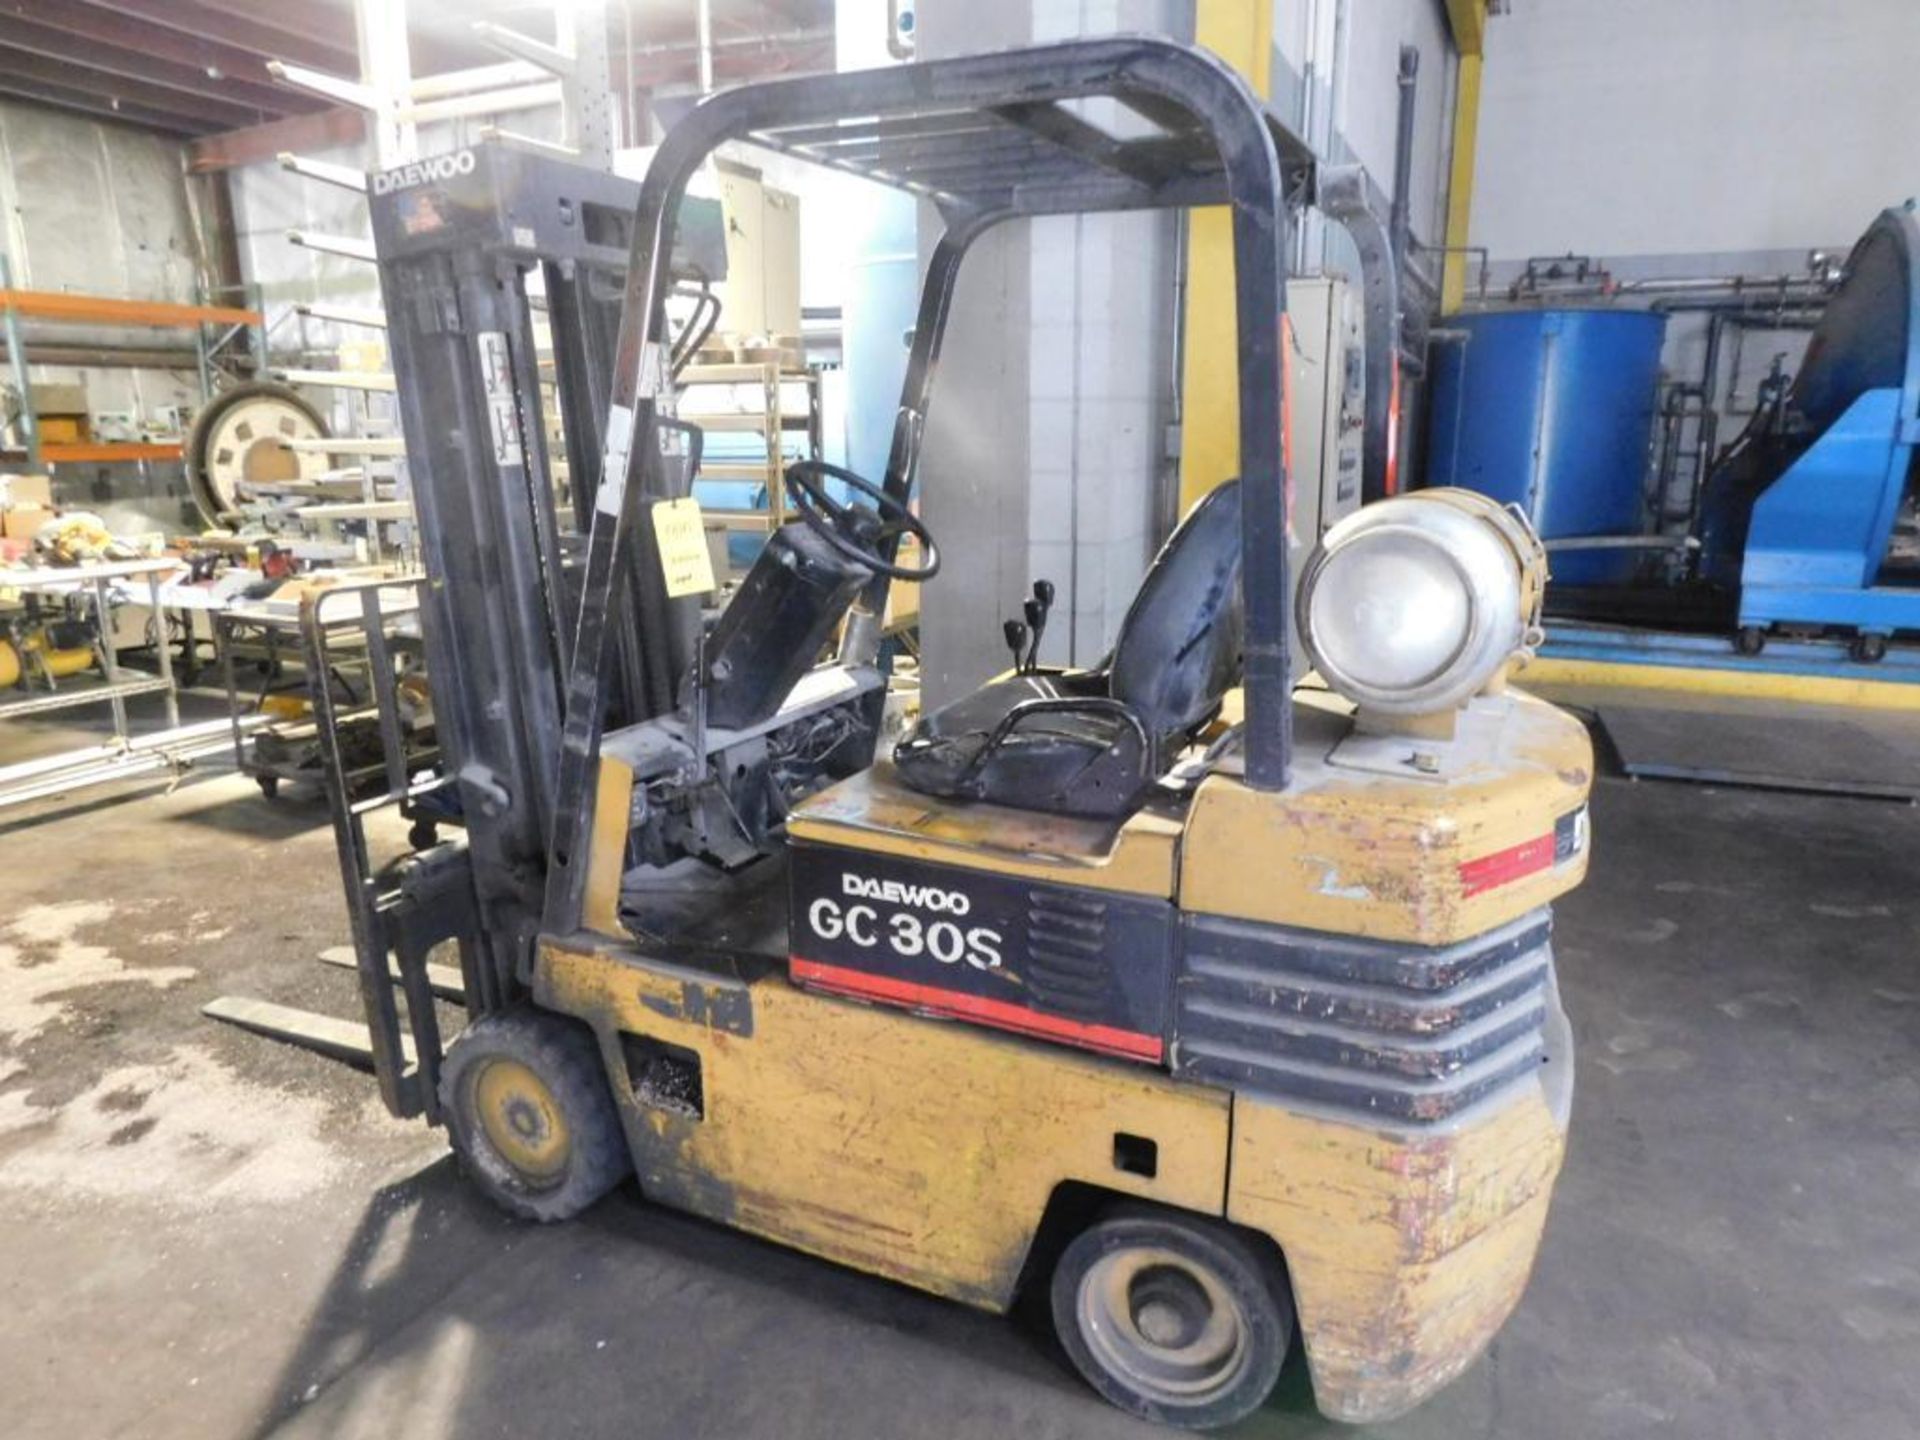 Daewoo 6000 lb. LP Forklift Model GC30S, S/N 08-06-01006, Overhead Guard, Solid Rubber Tires, 183 in